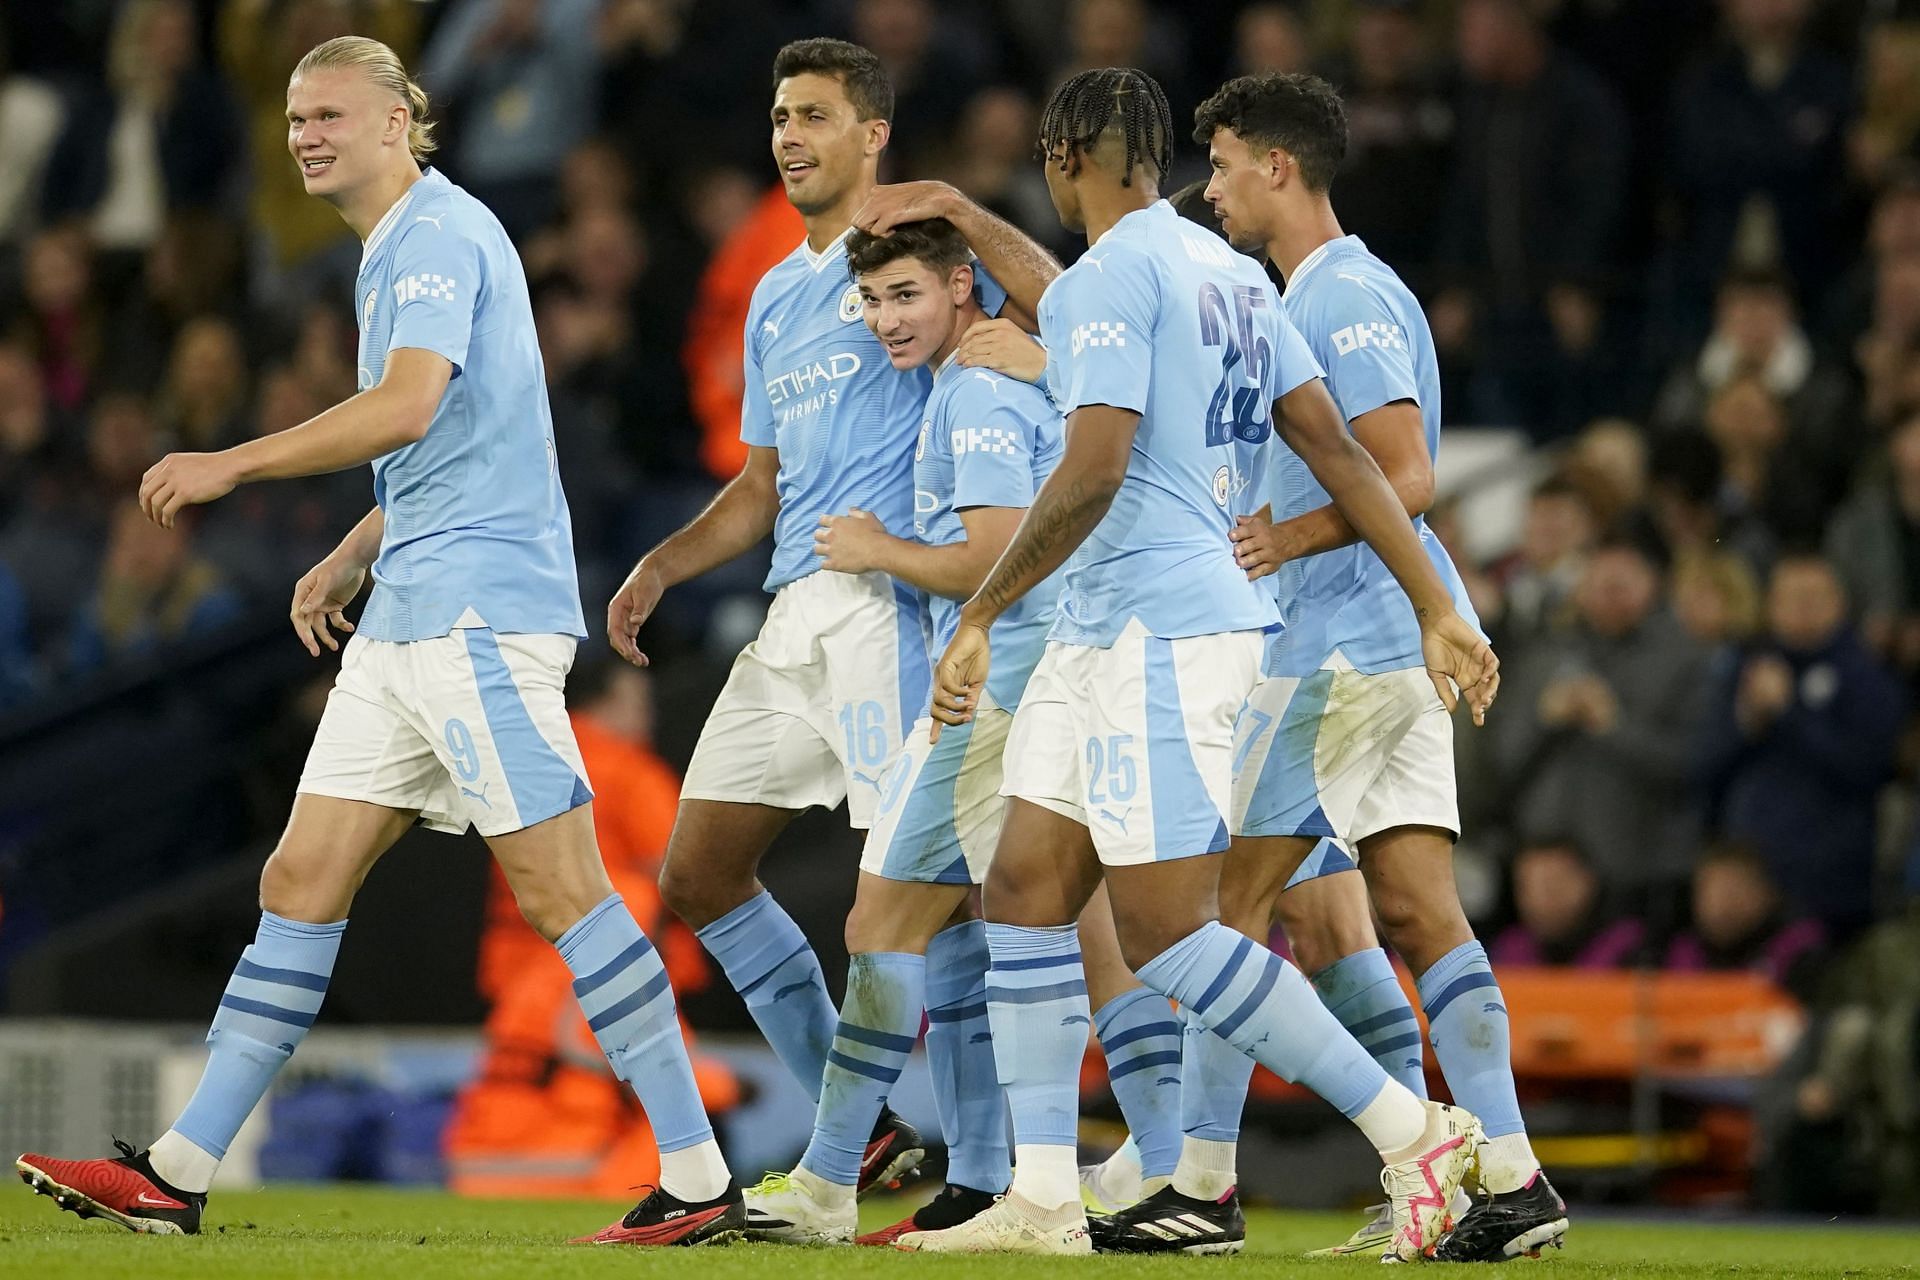 Manchester City 3-1 Crvena zvezda: 5 Talking Points as PL side complete  come-from-behind win